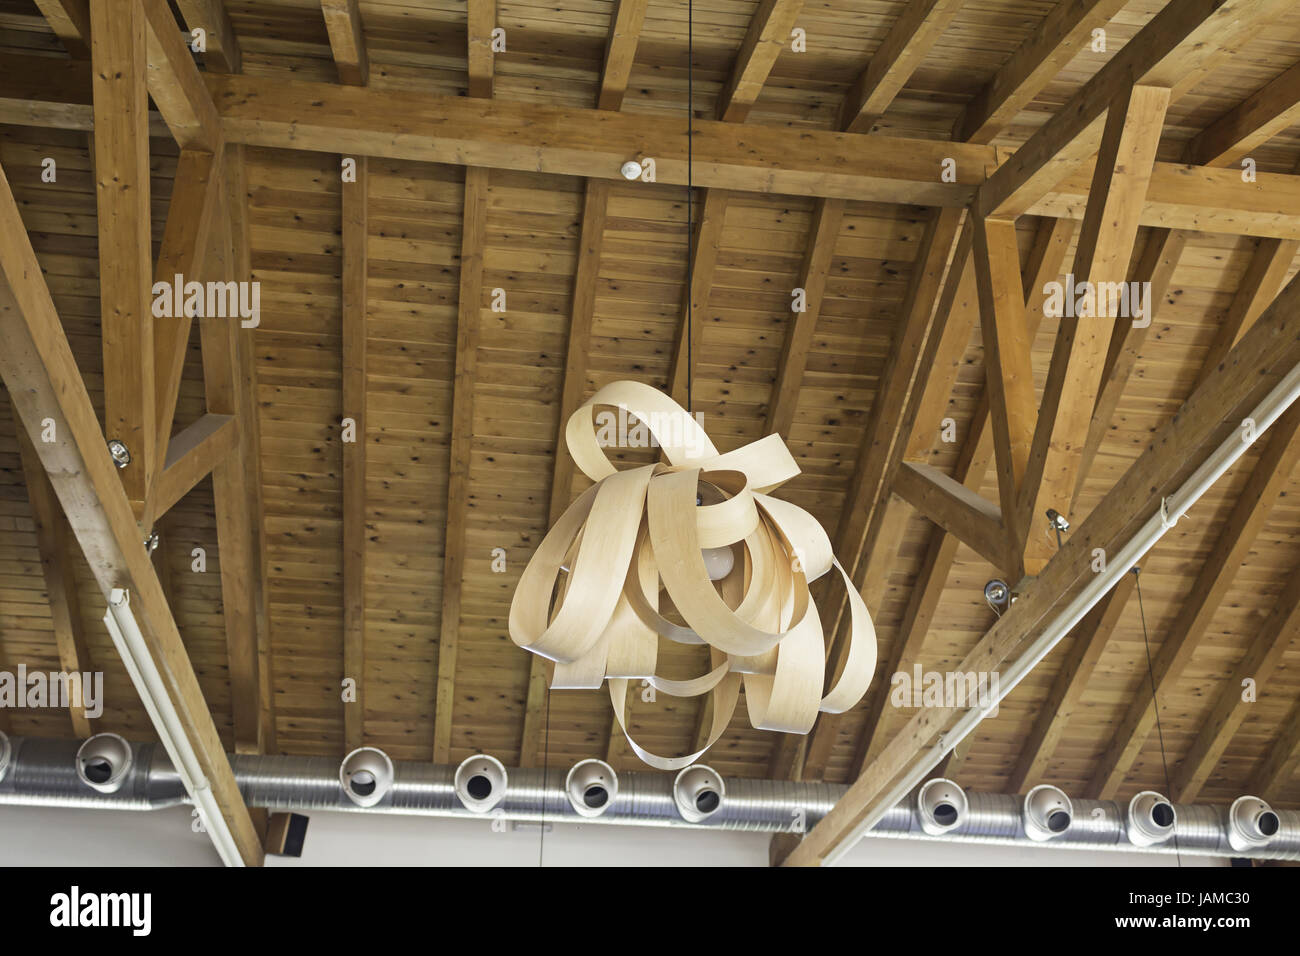 Celebration with paper lamp hanging on wooden roof construction Stock Photo  - Alamy